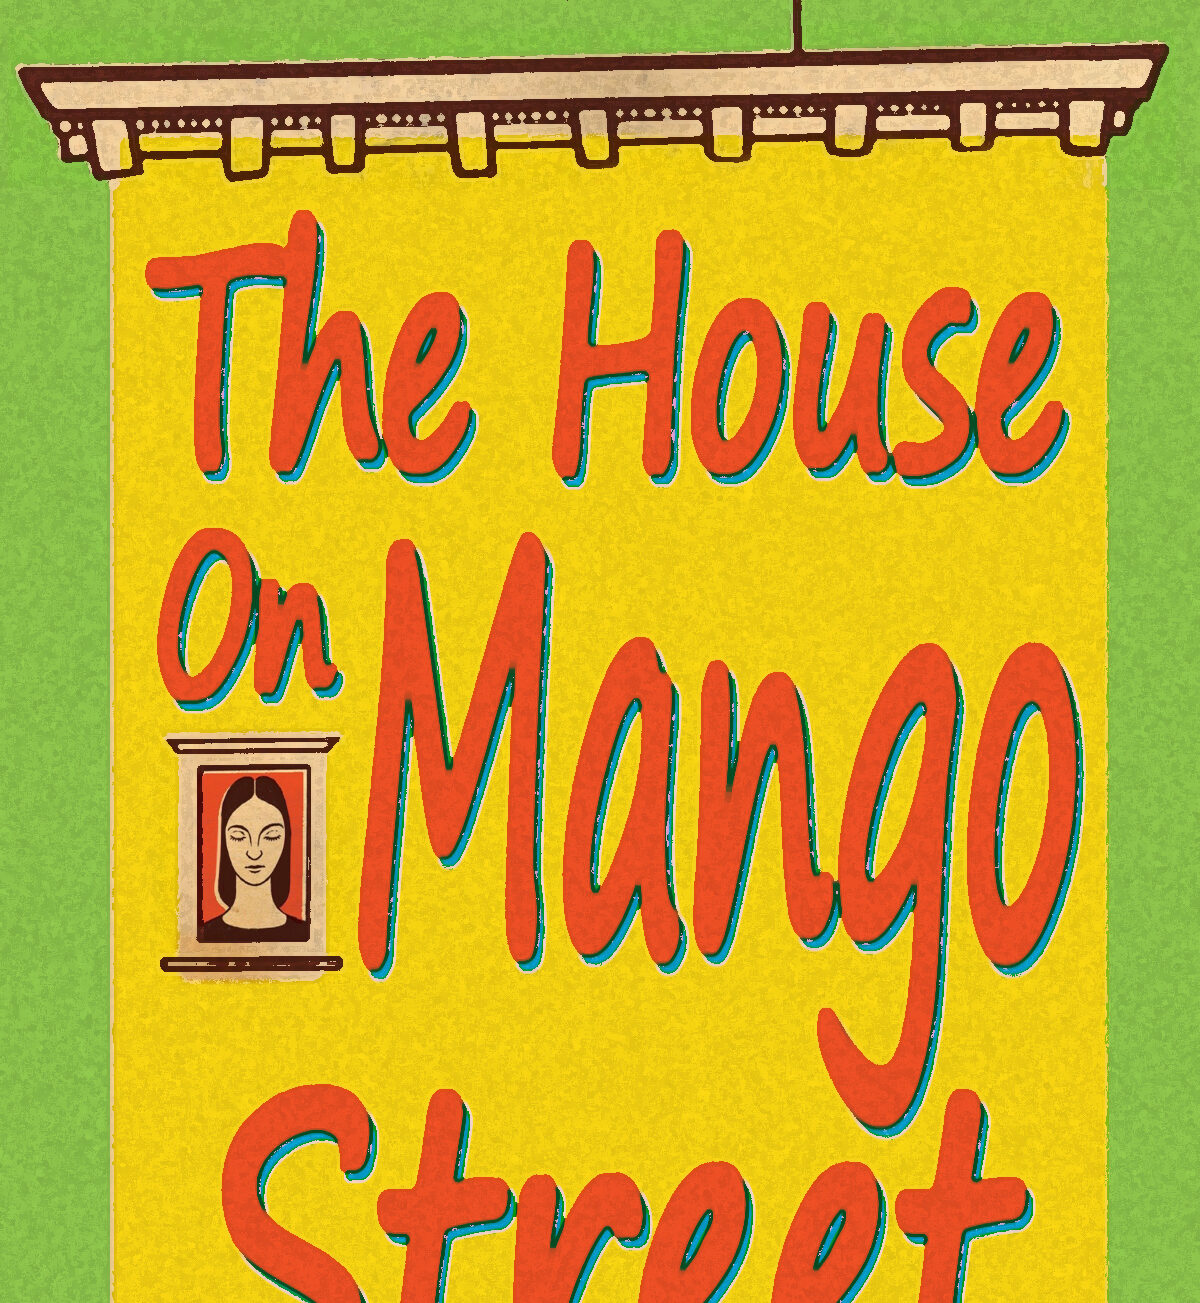 This book is Banned-The House on Mango Street discussion guide